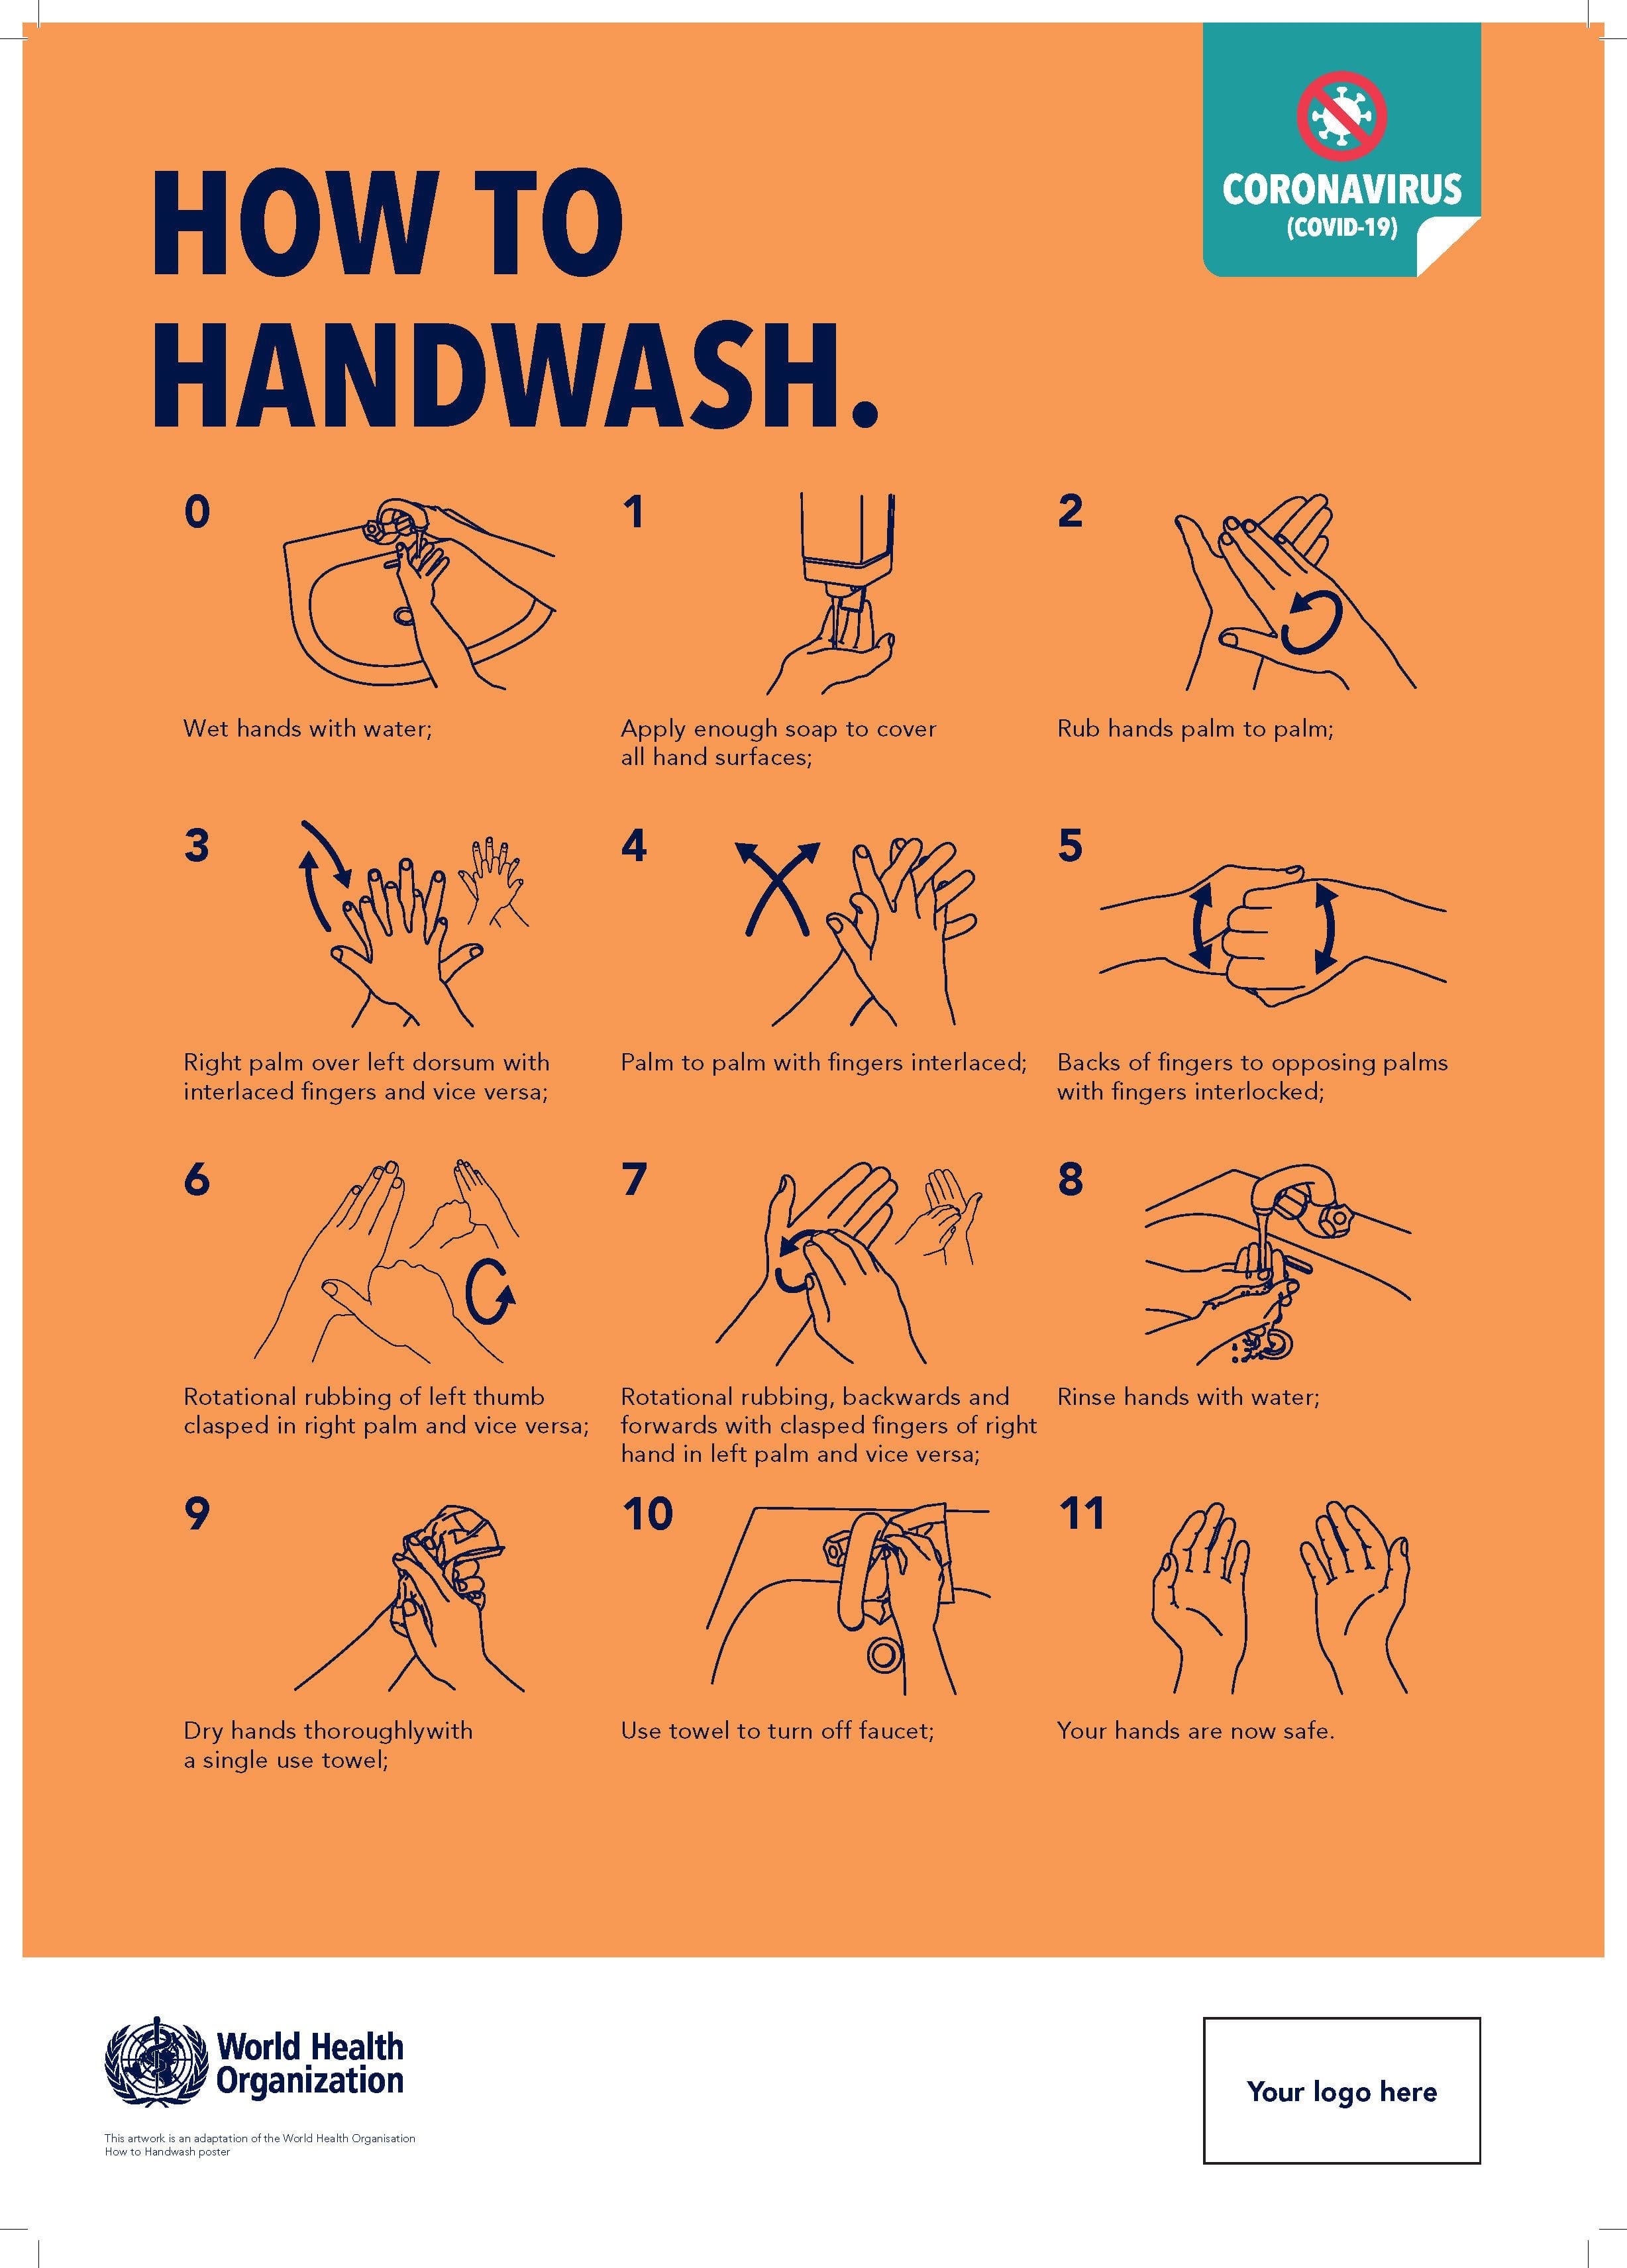 #9: 'How to Wash your Hands'